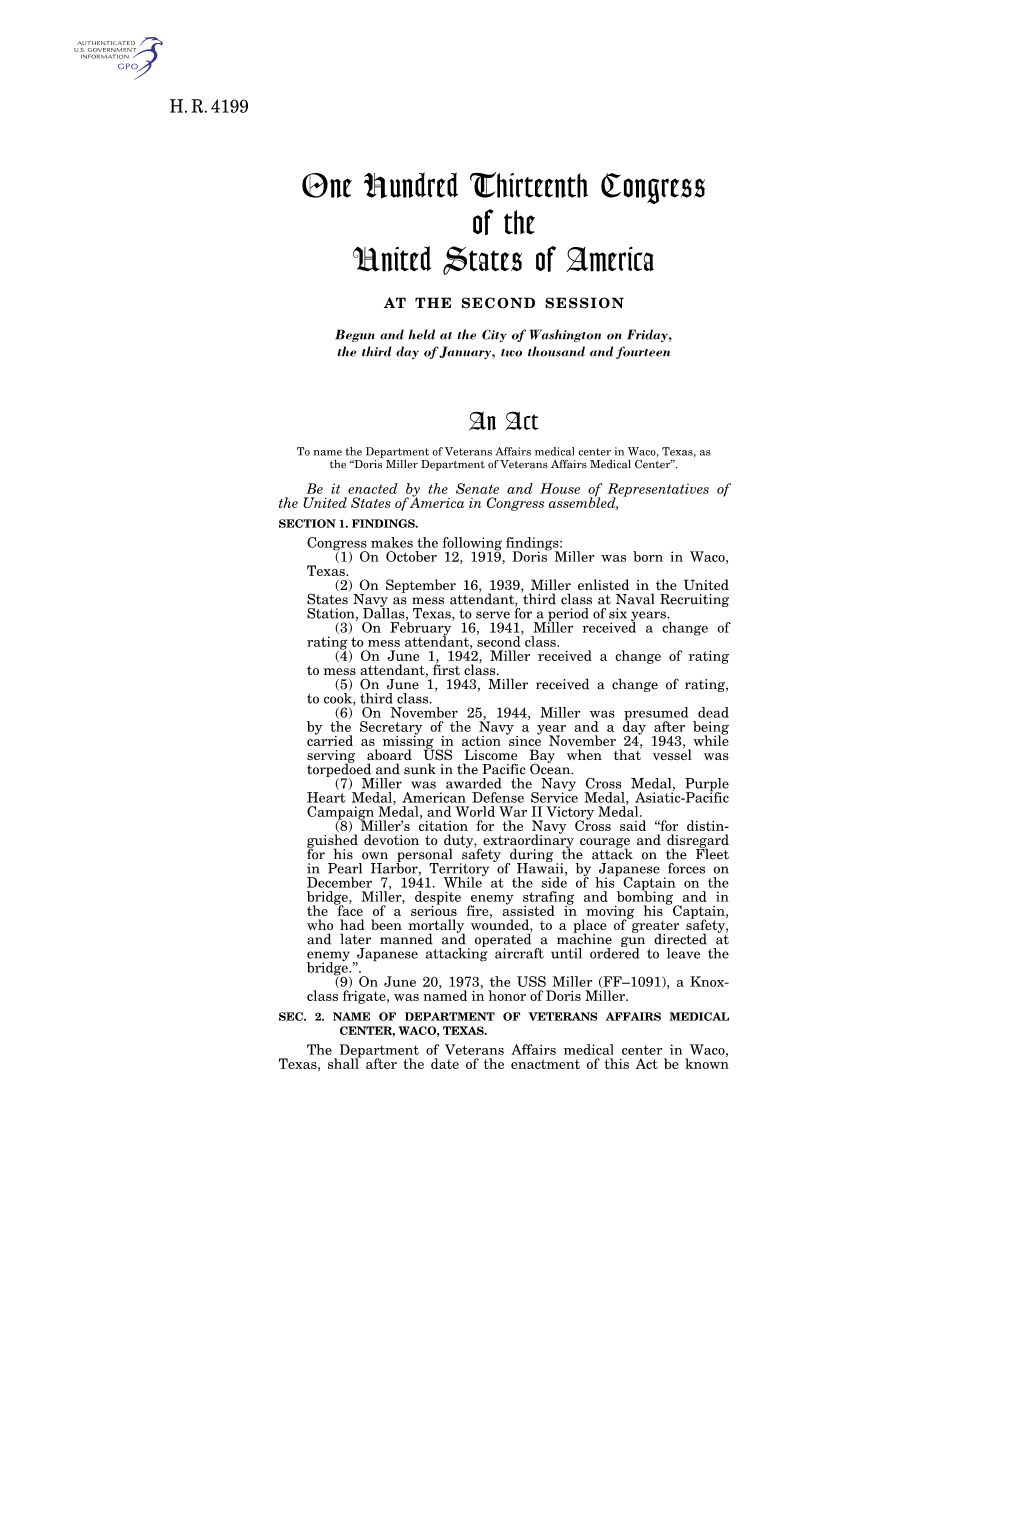 One Hundred Thirteenth Congress of the United States of America